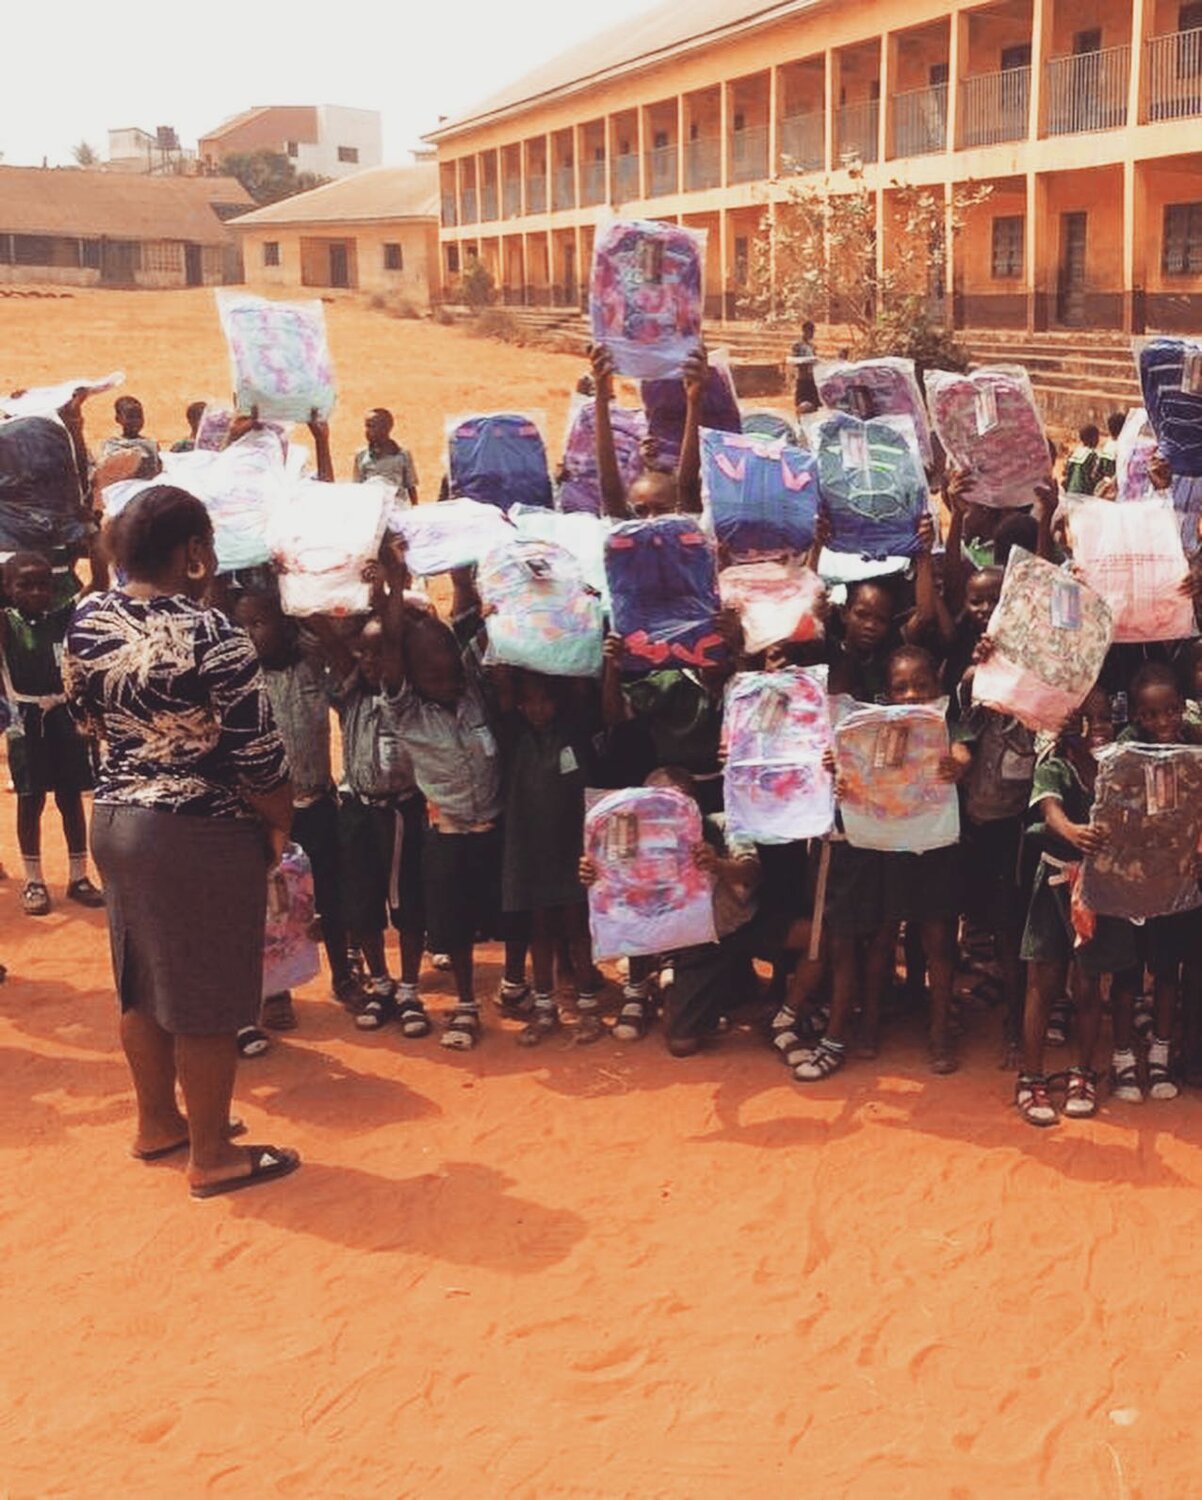 Students at Ogboli Primary School in Nigeria received backpacks from the organization.